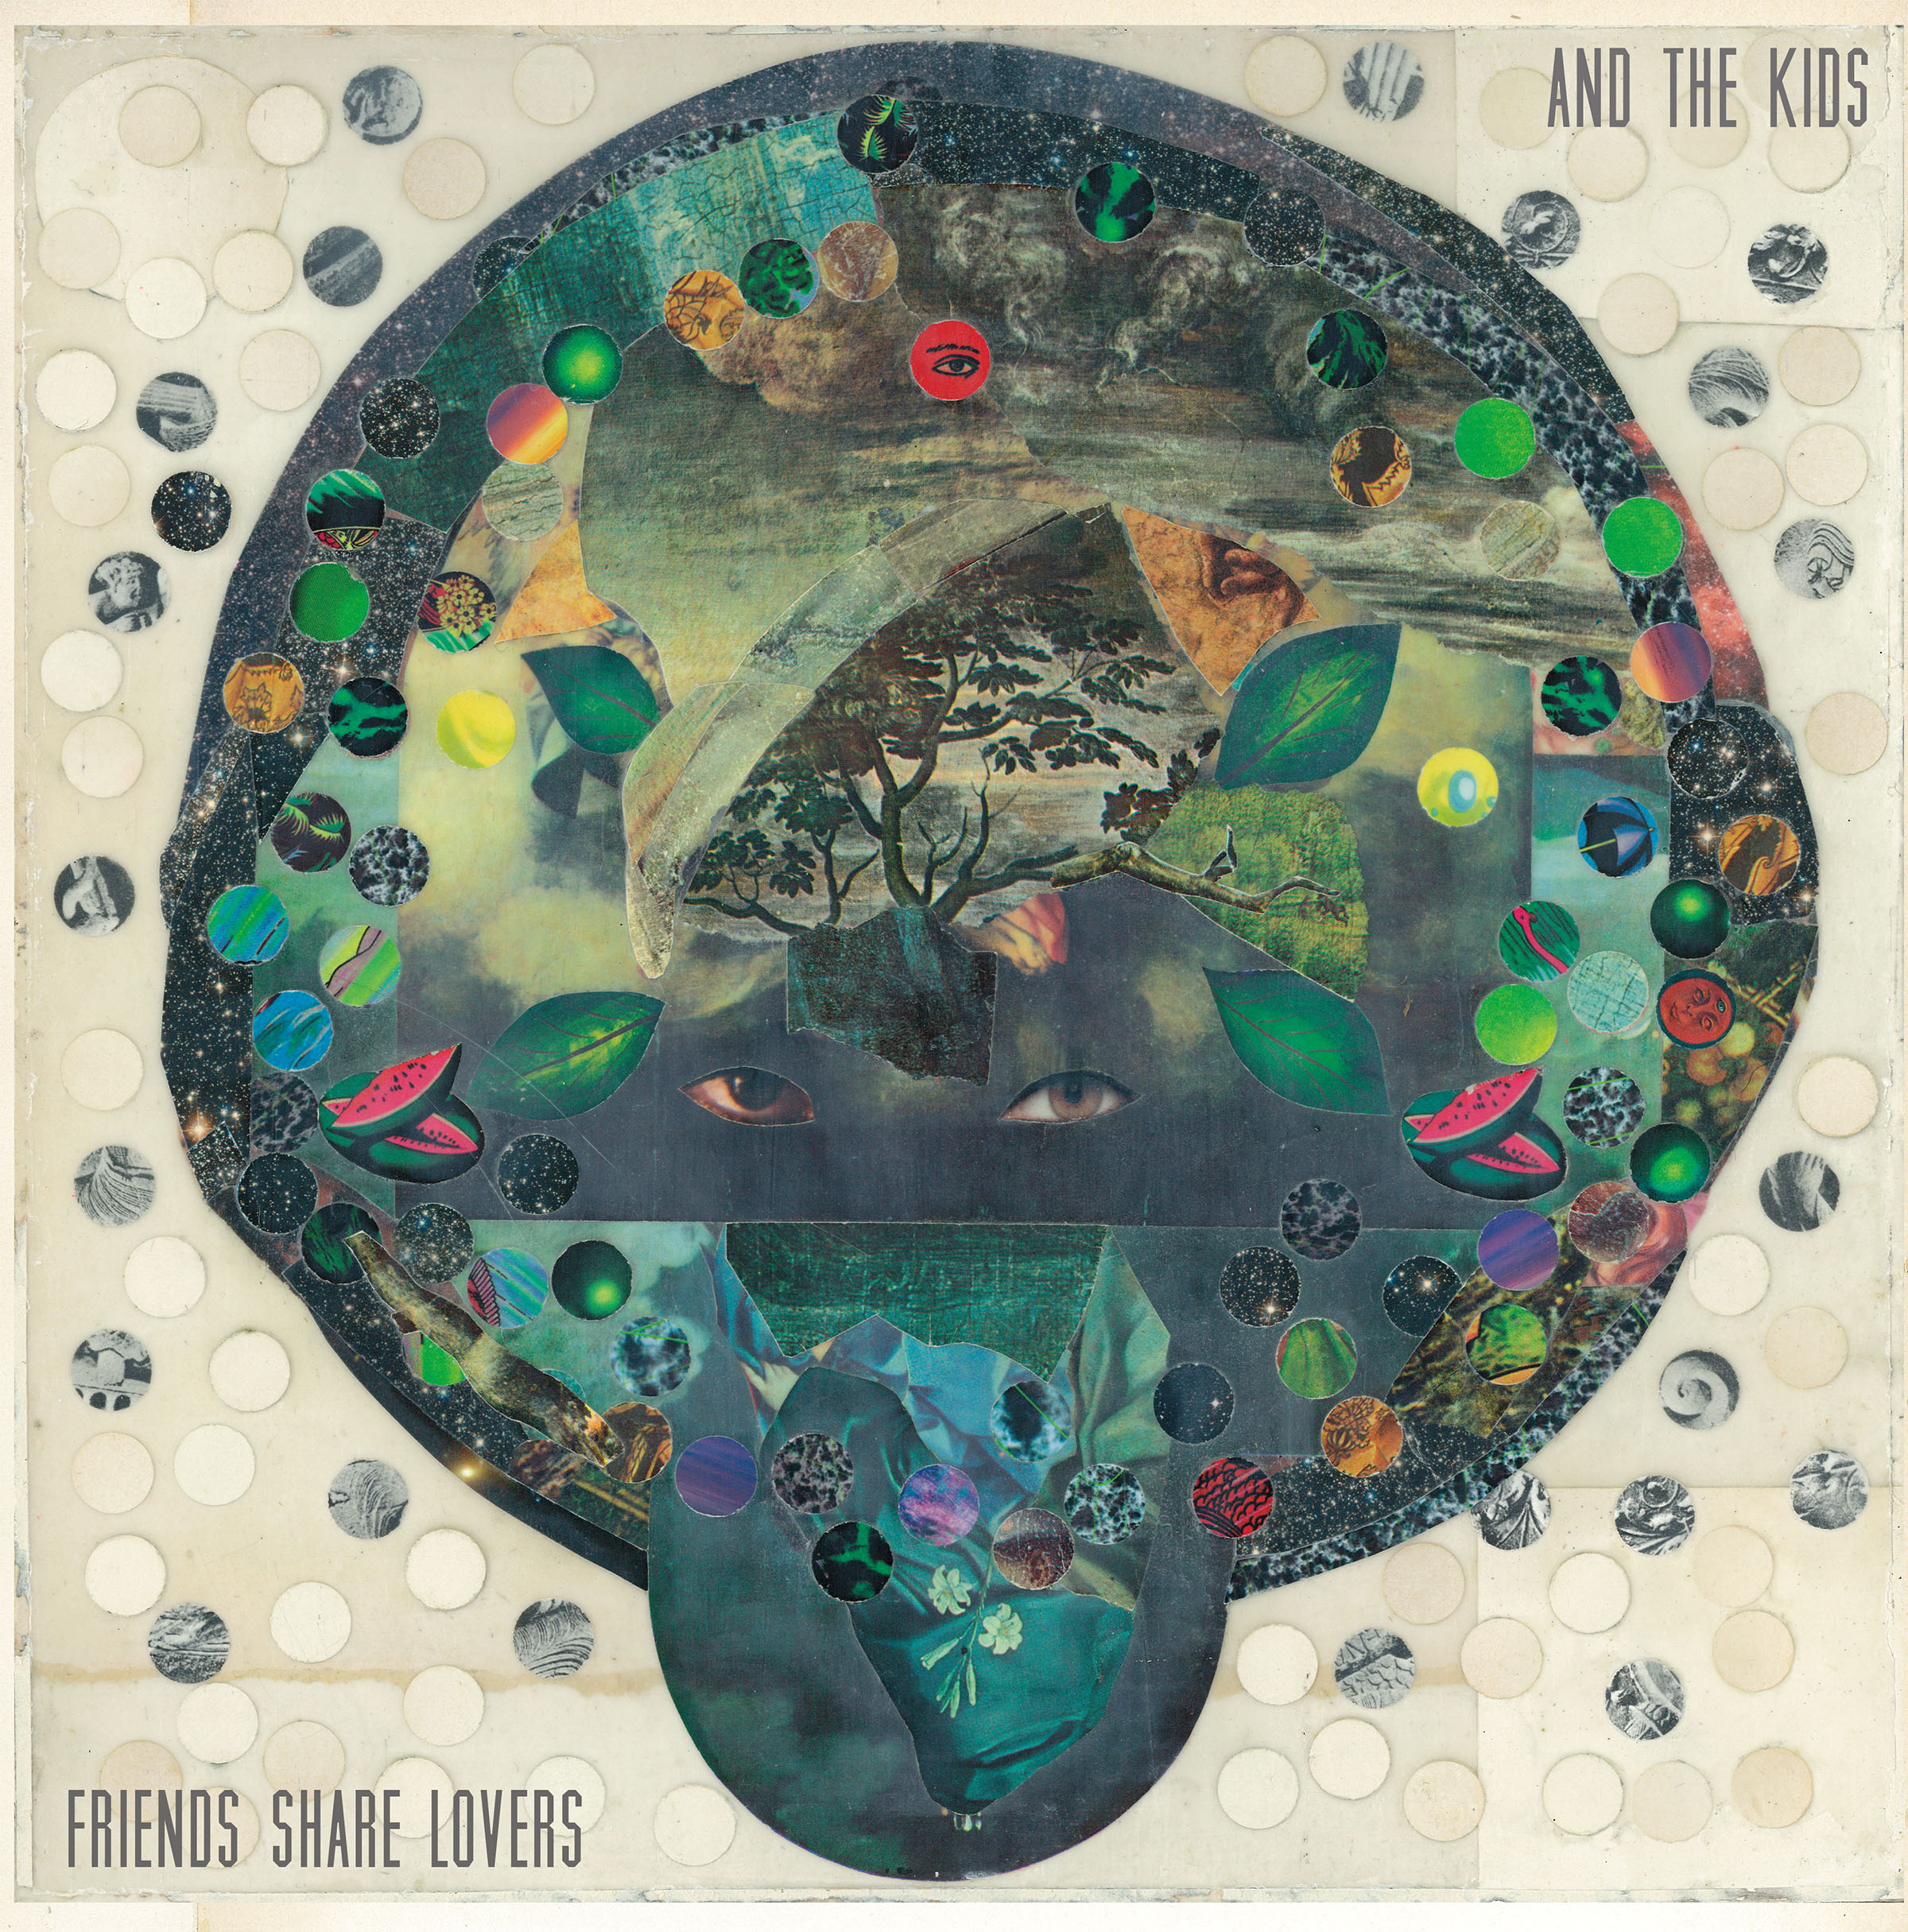 And The Kids near indie rock graduation on new album “Friends Share Lovers”